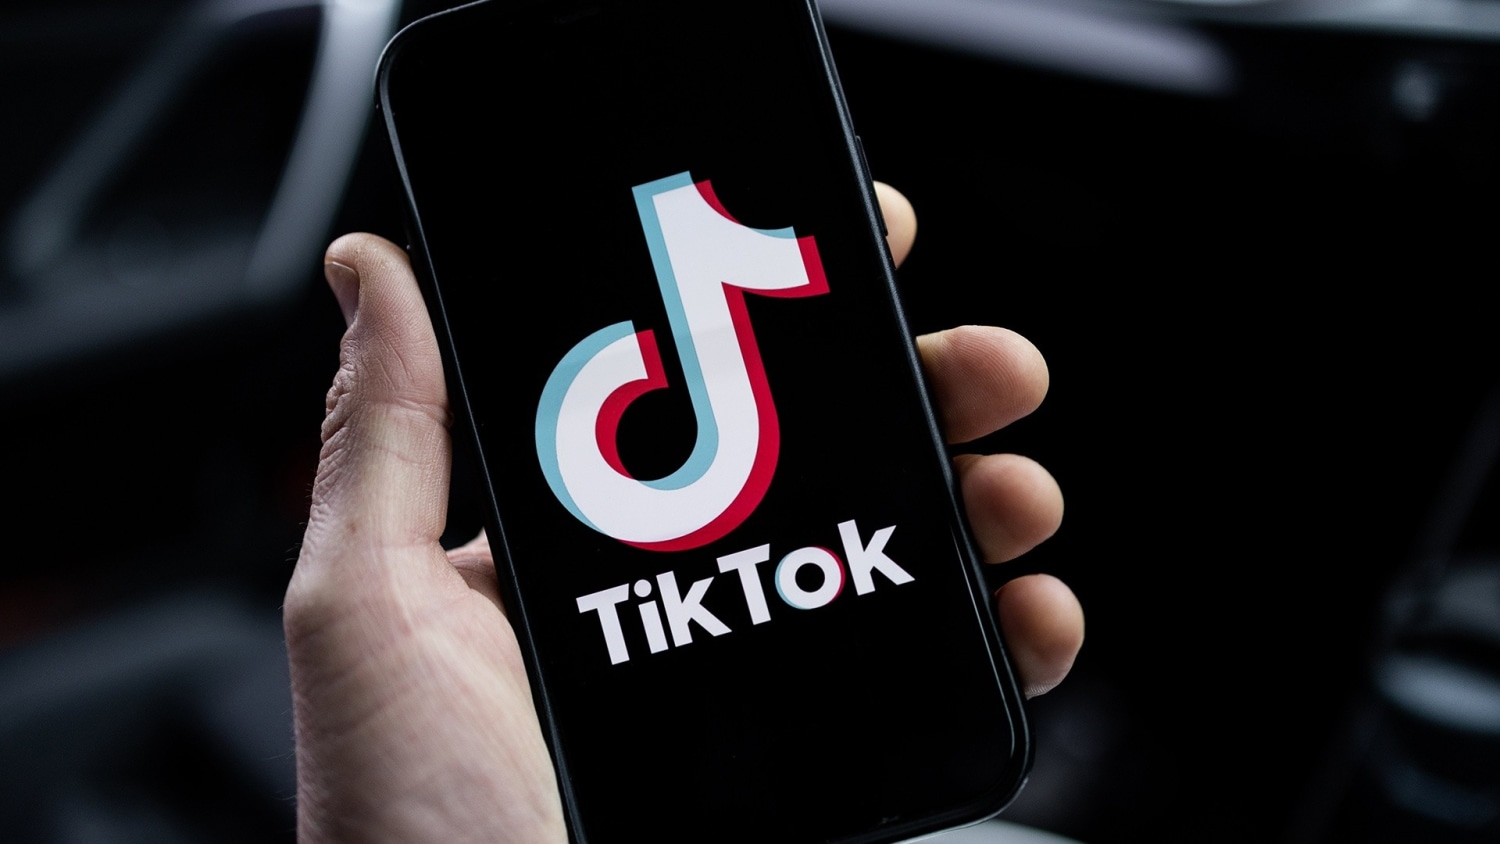 White House backs bipartisan bill that could be used to ban TikTok